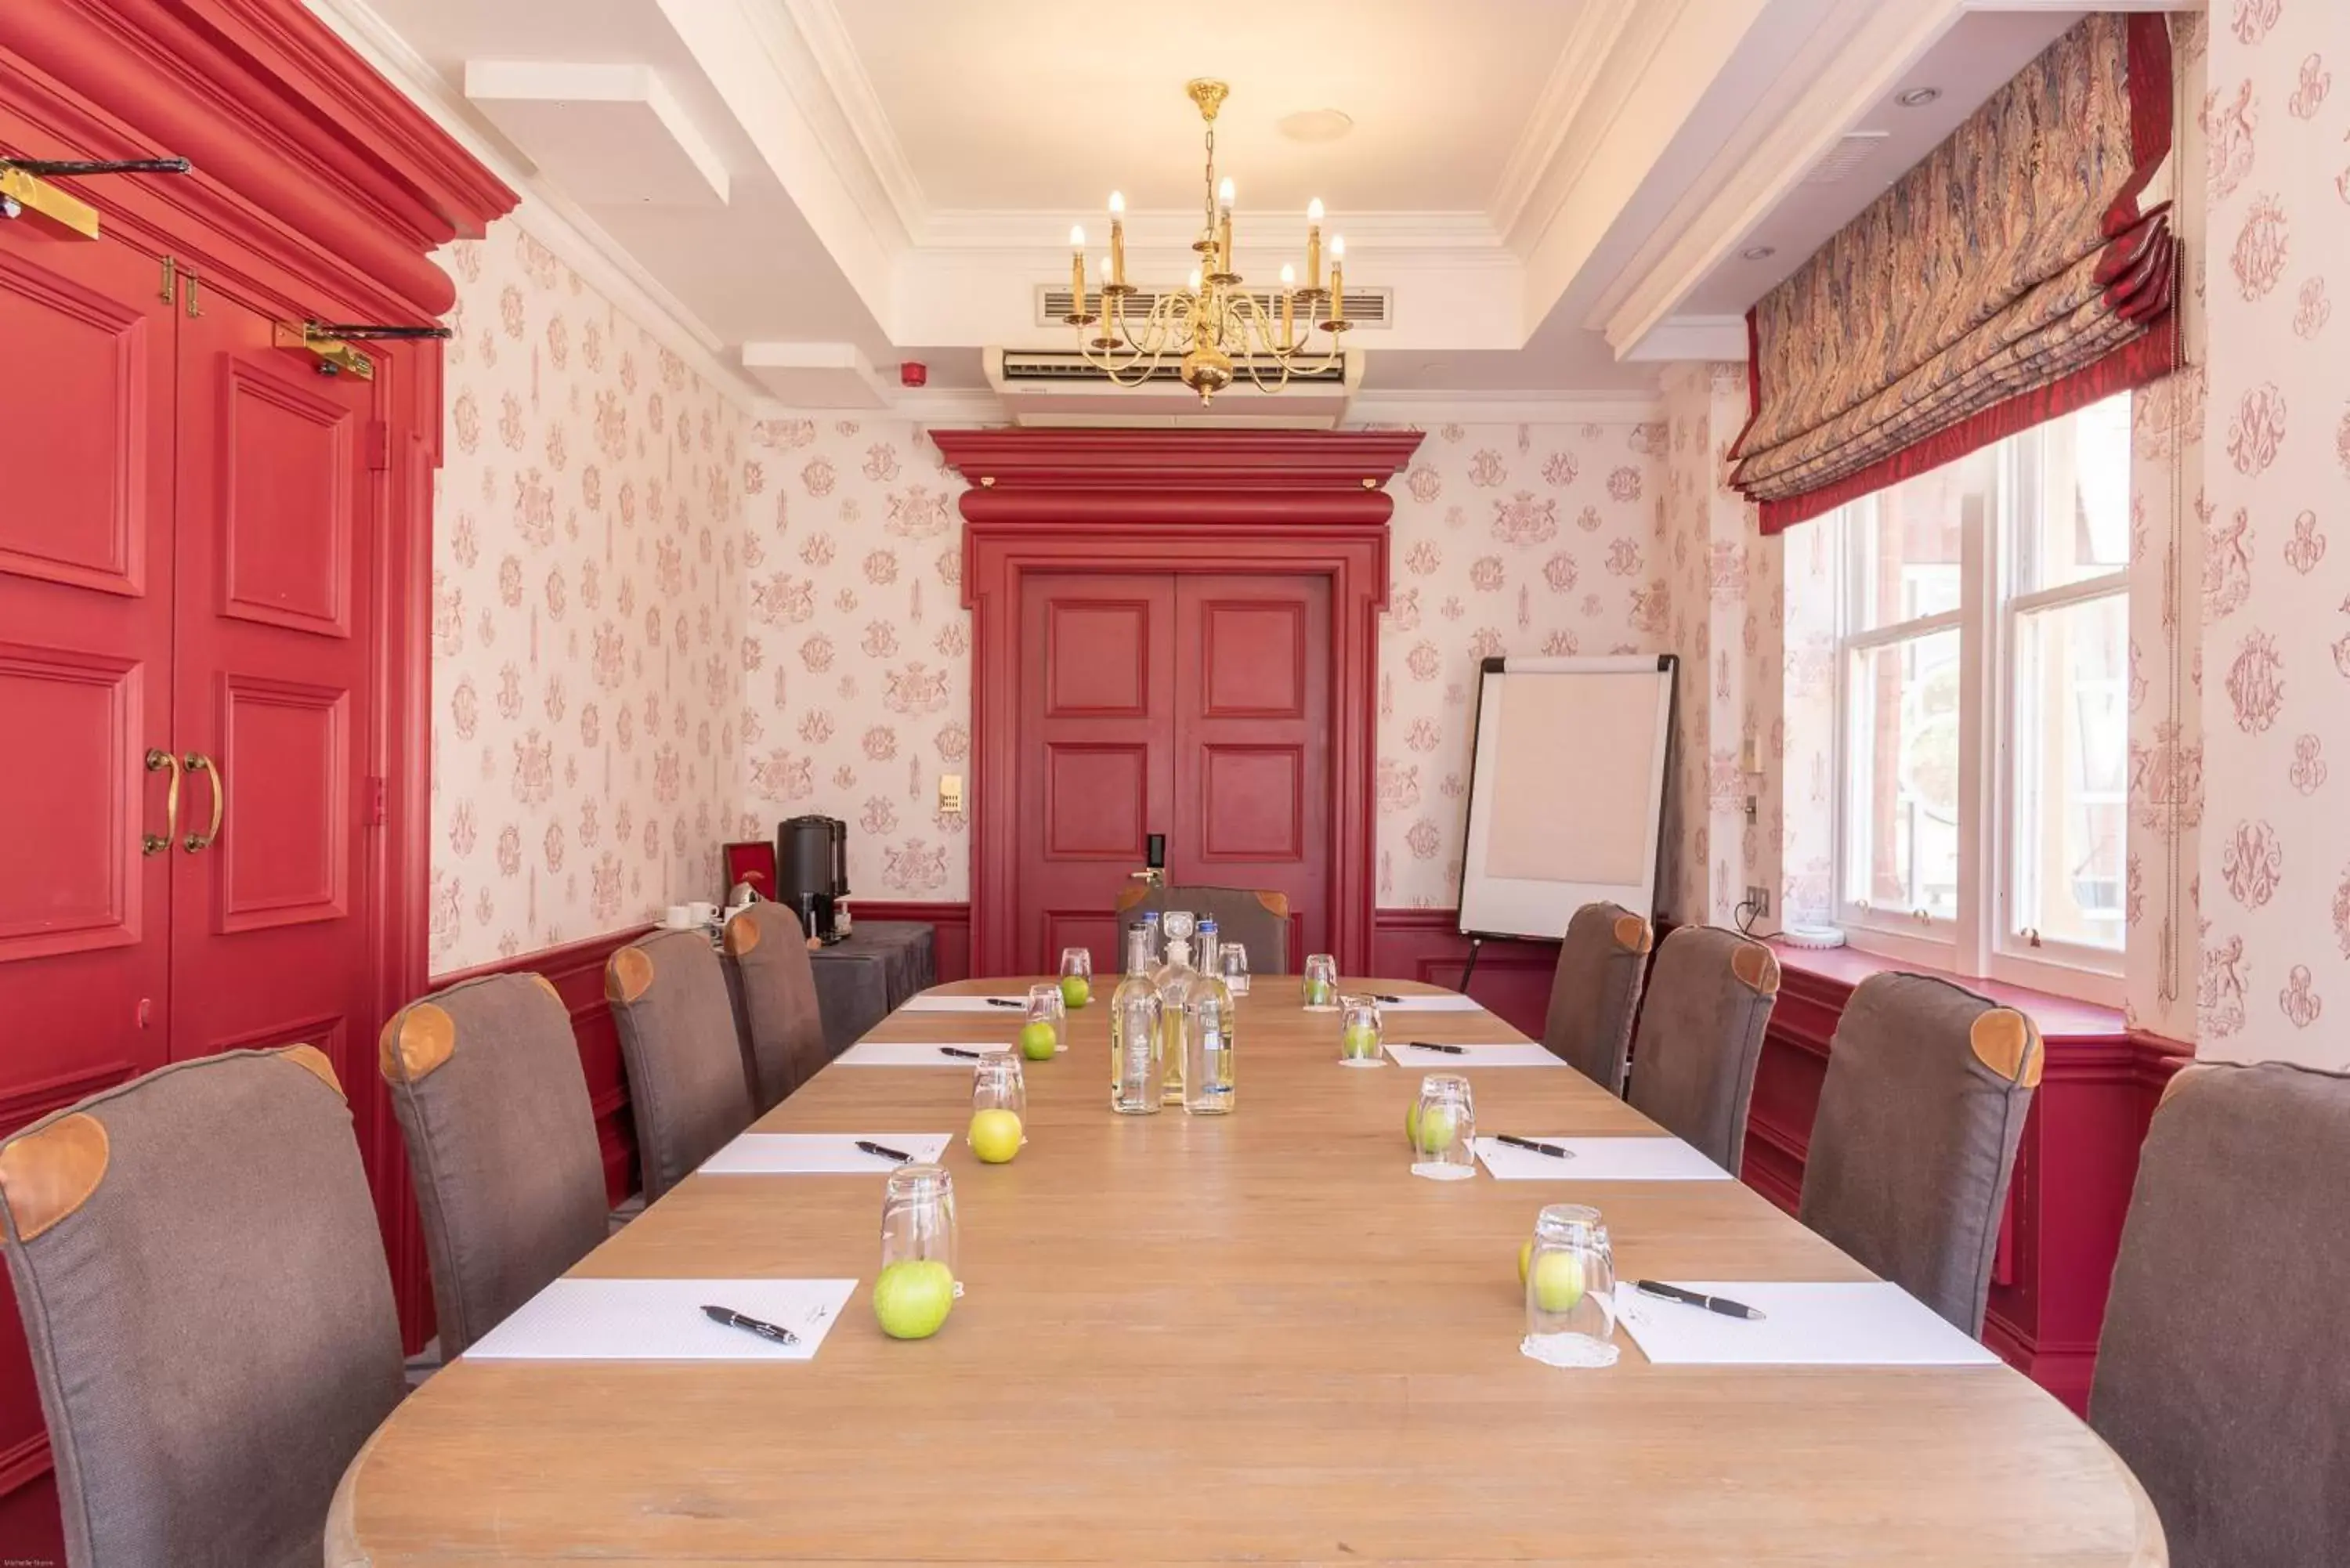 Meeting/conference room in Pendley Manor